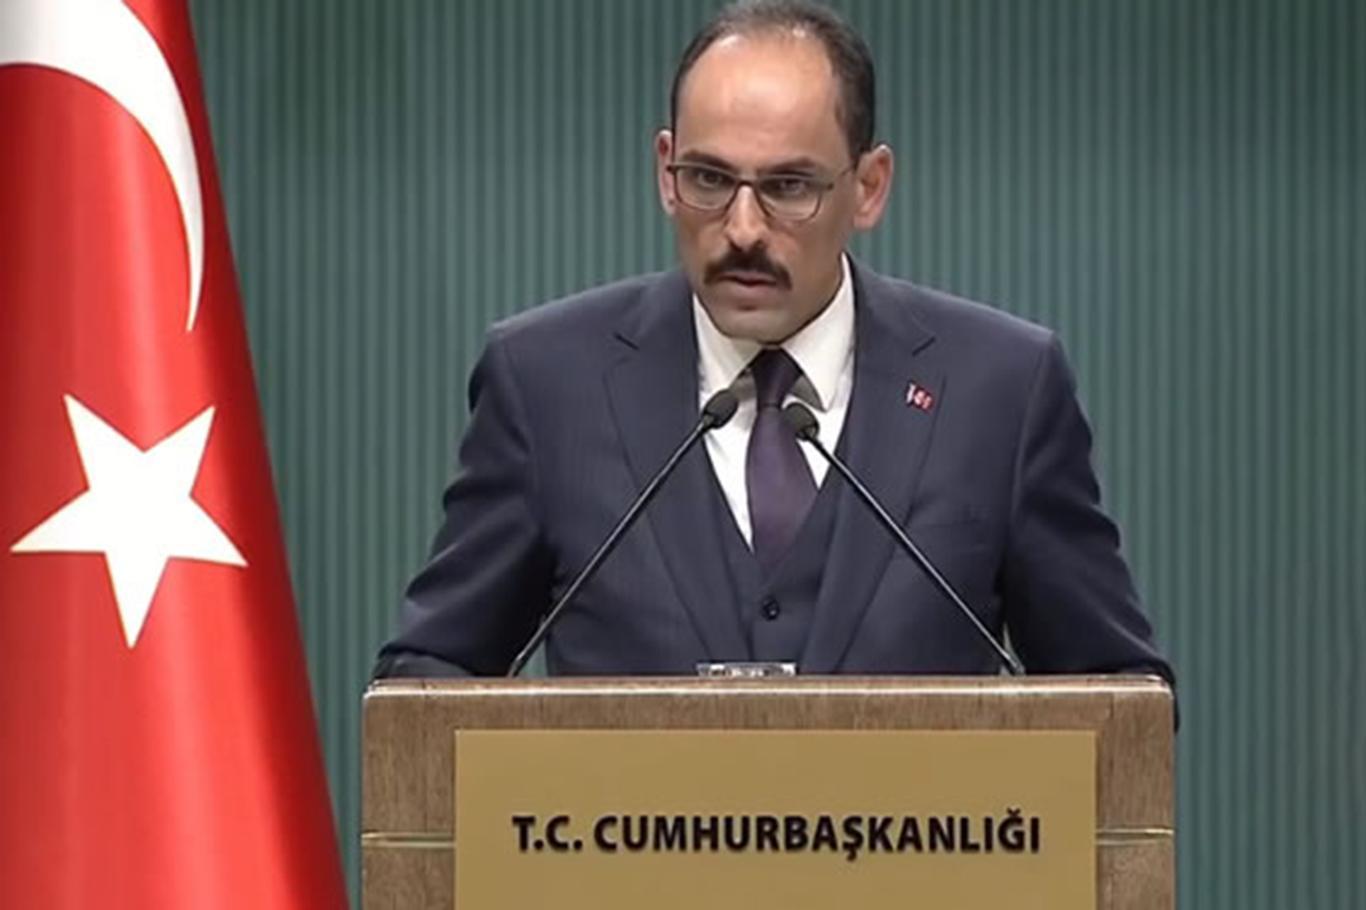 We stand ready to cooperate with all parties to make Mediterranean a sea of peace: Kalın